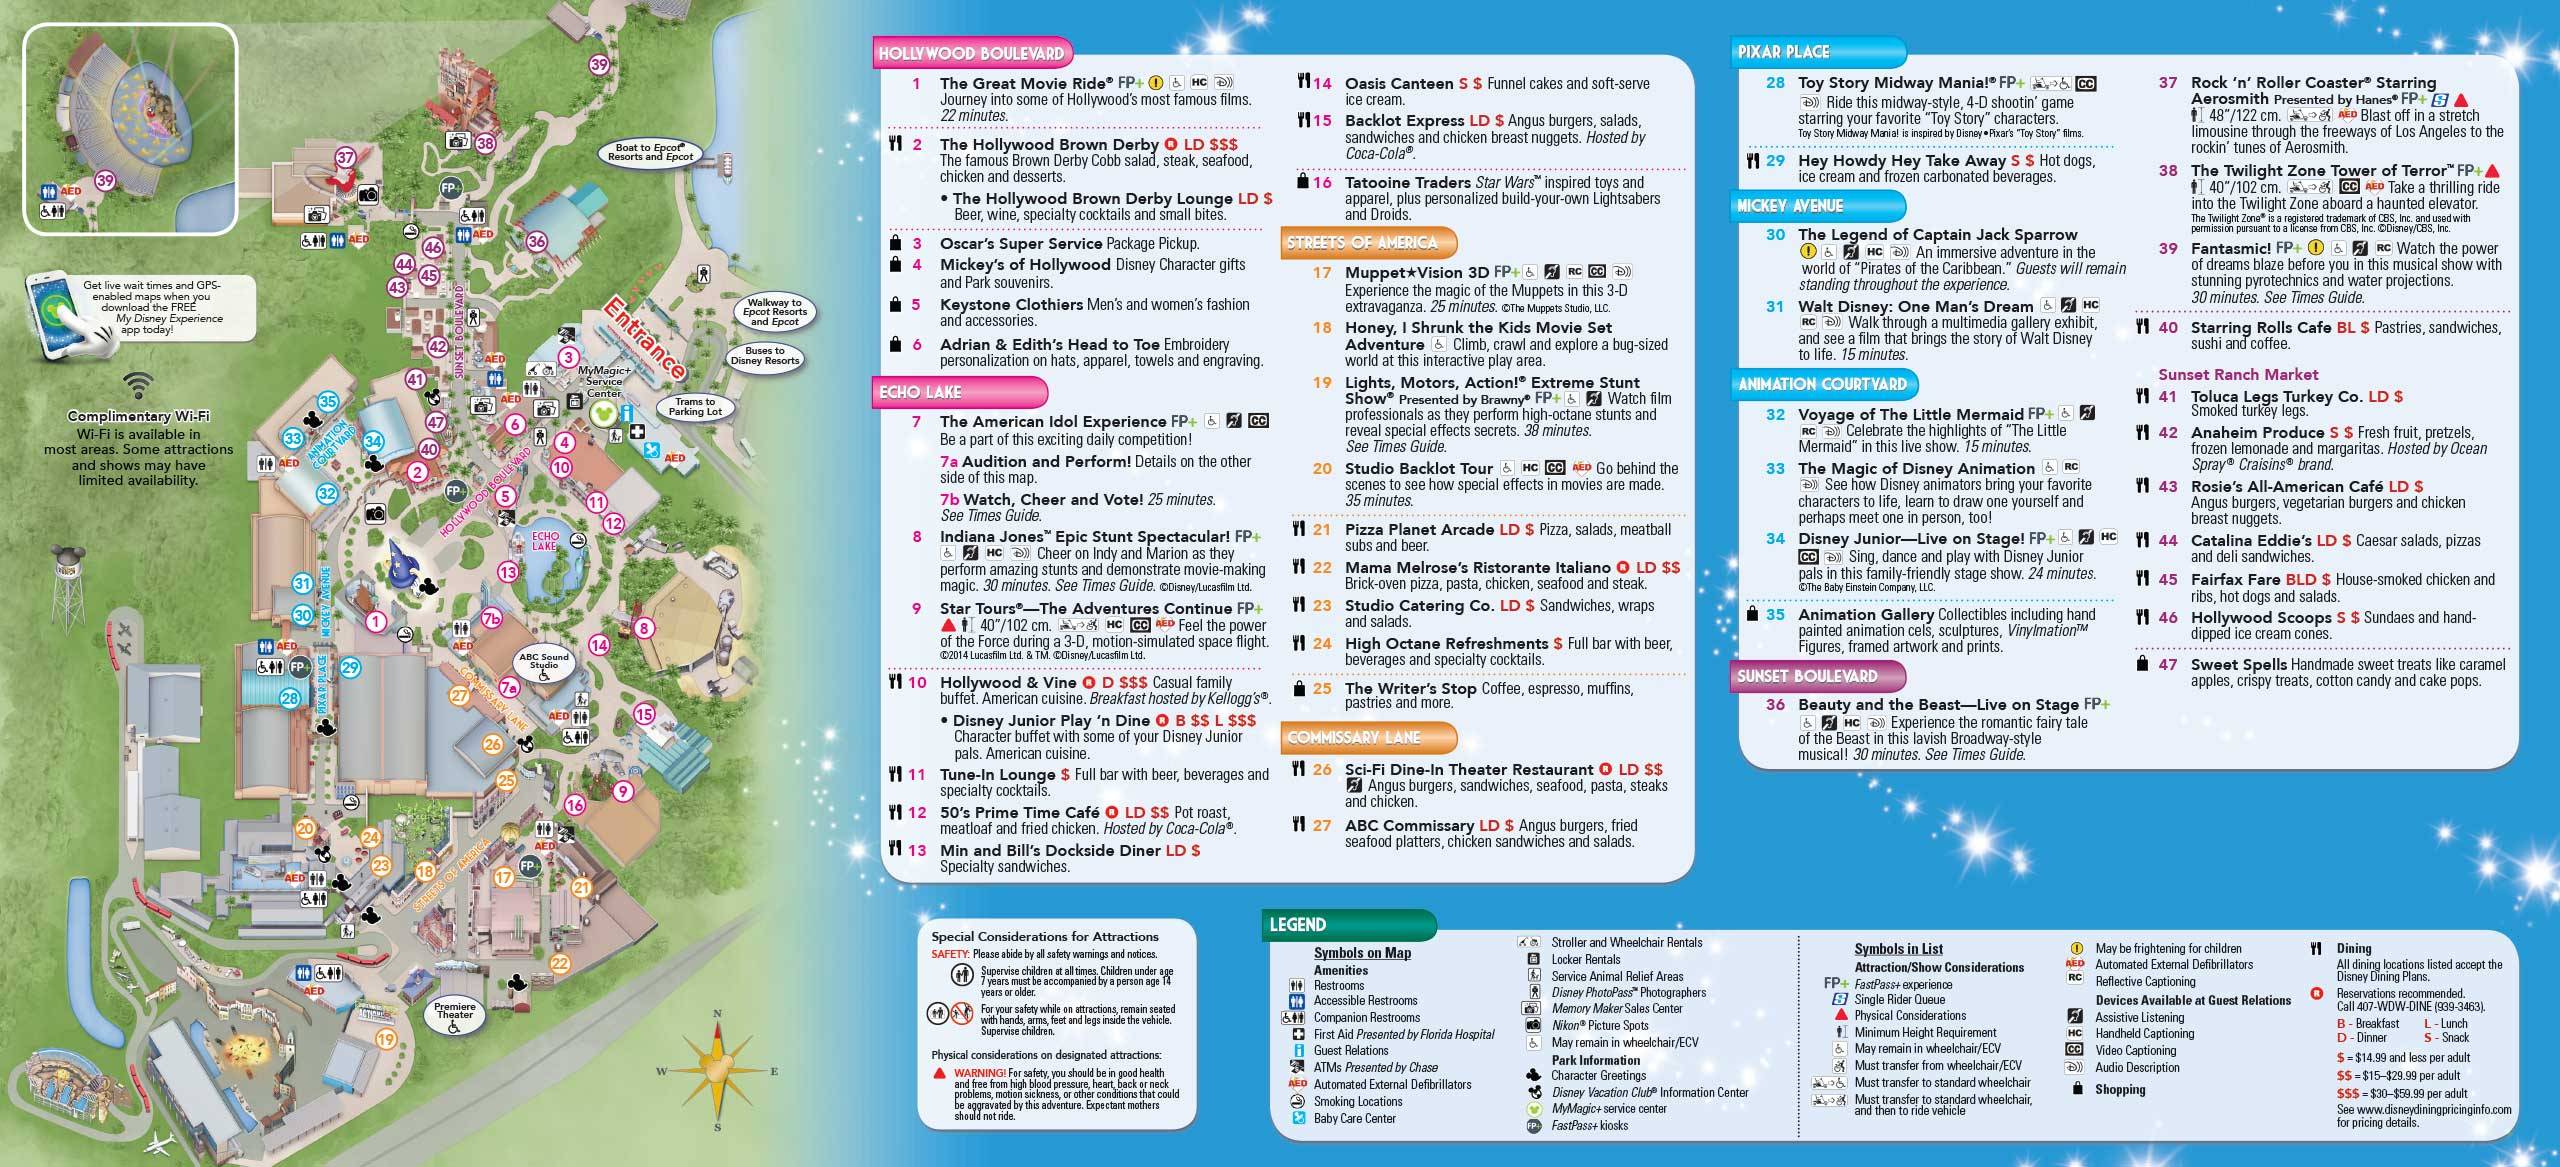 2014 Disney's Hollywood Studios guide map with FastPass+ details